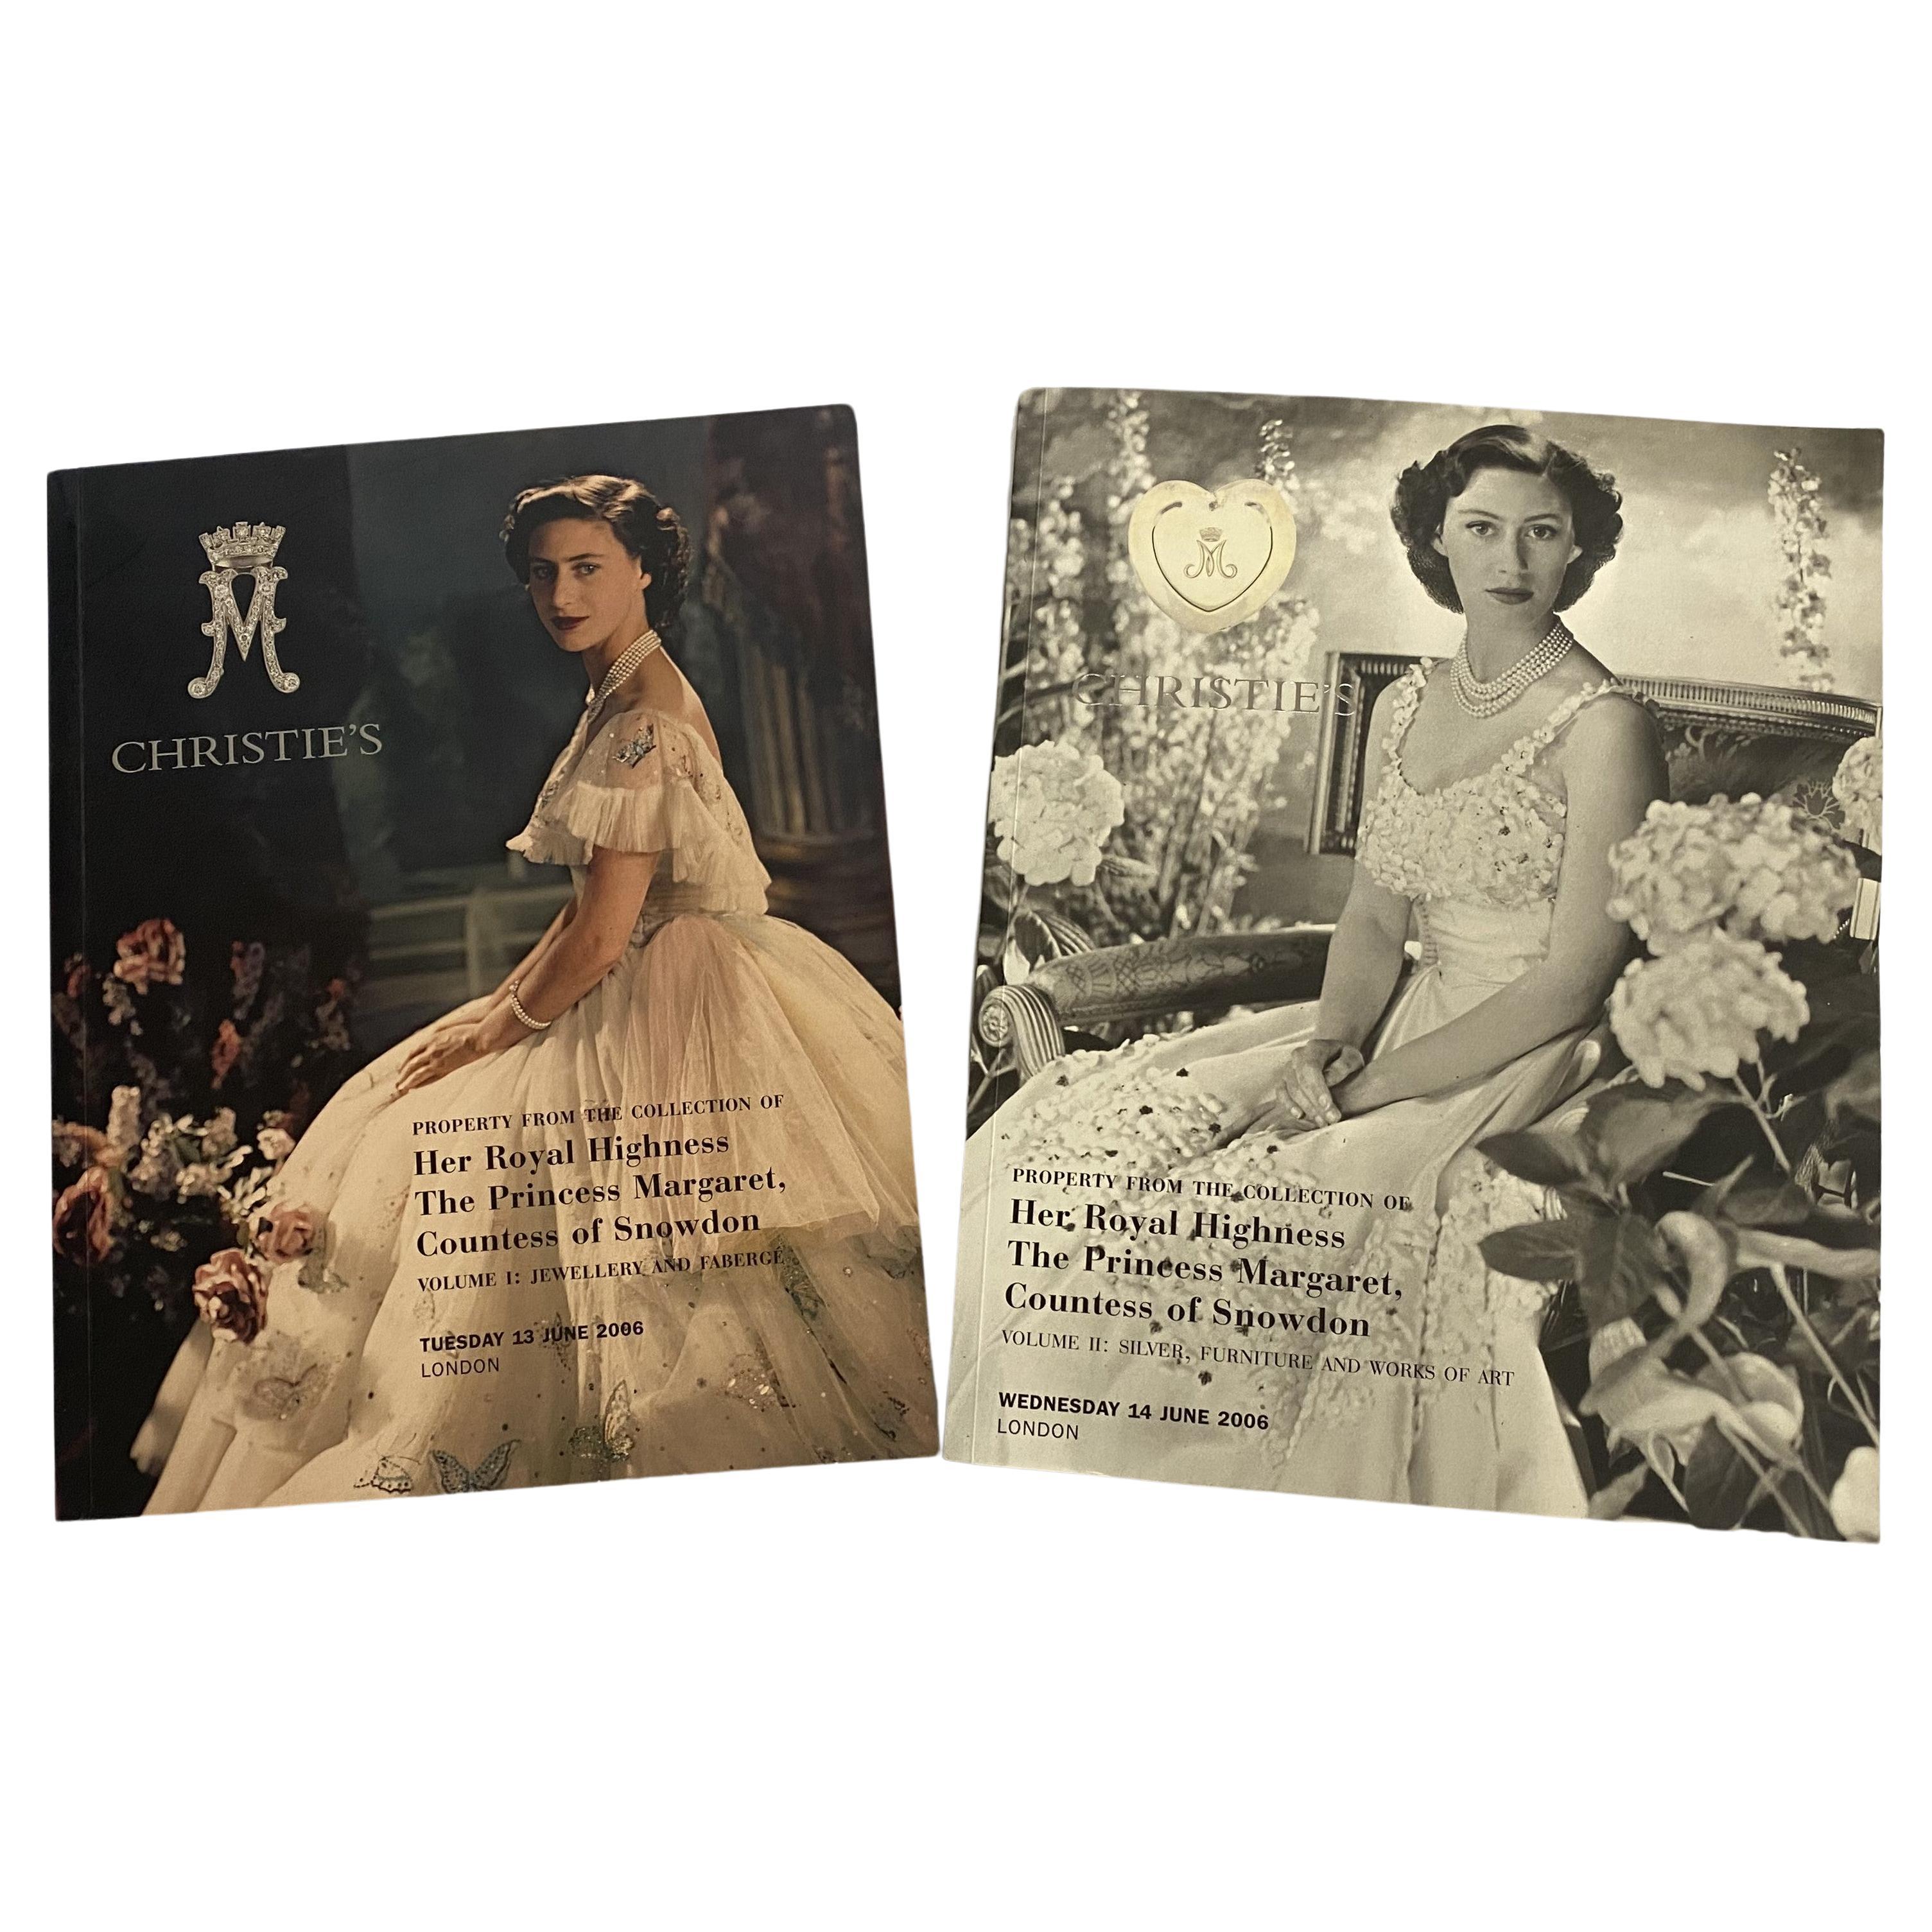 Property from the Collection of Her Royal Highness The Princess Margaret (Book) For Sale